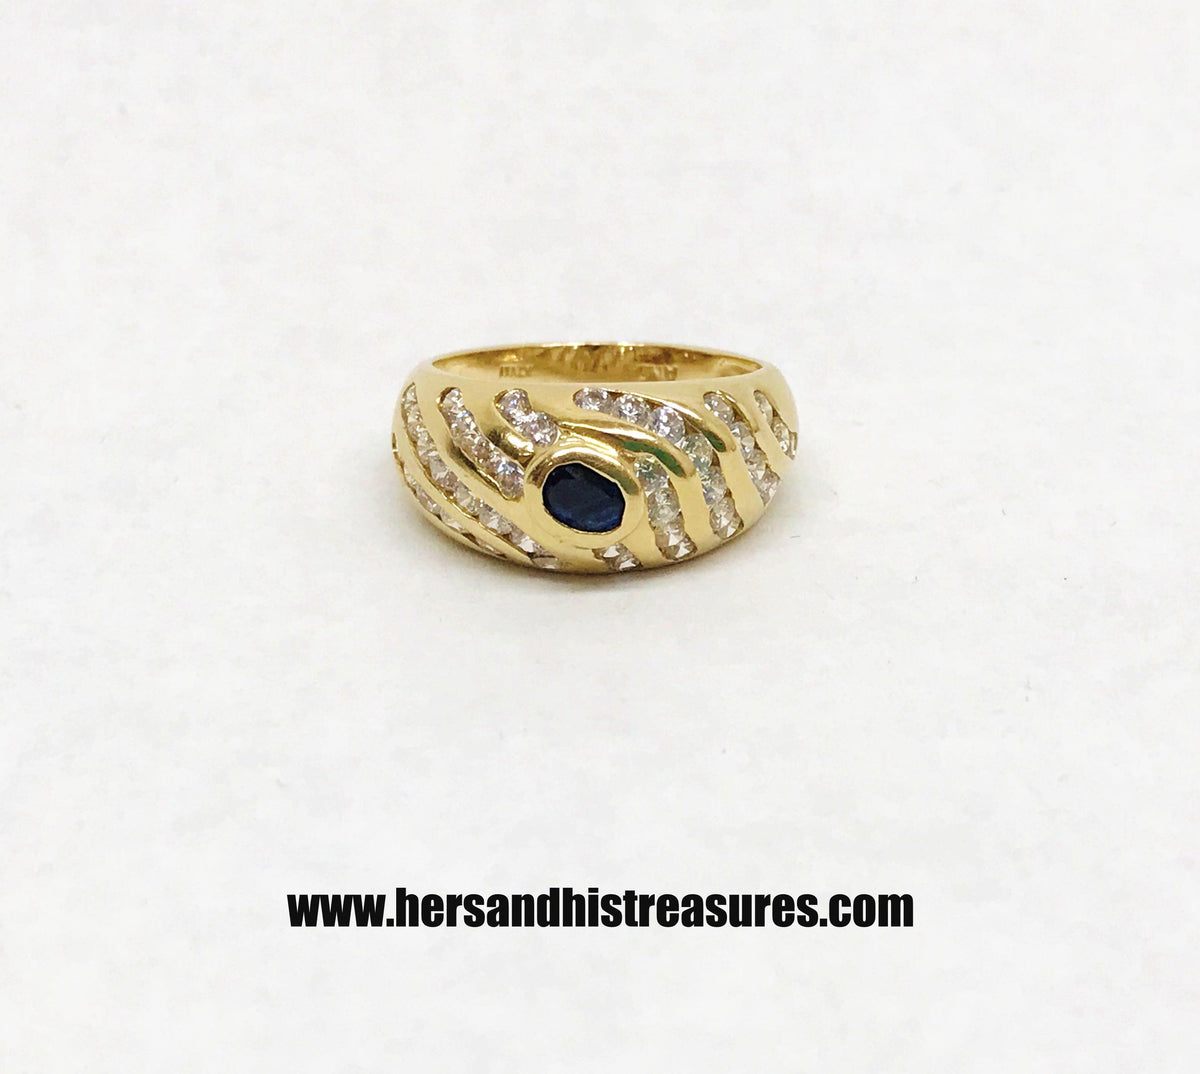 Vintage Diamonds and Sapphire 14K Italy Ring Signed AND - Hers and His Treasures